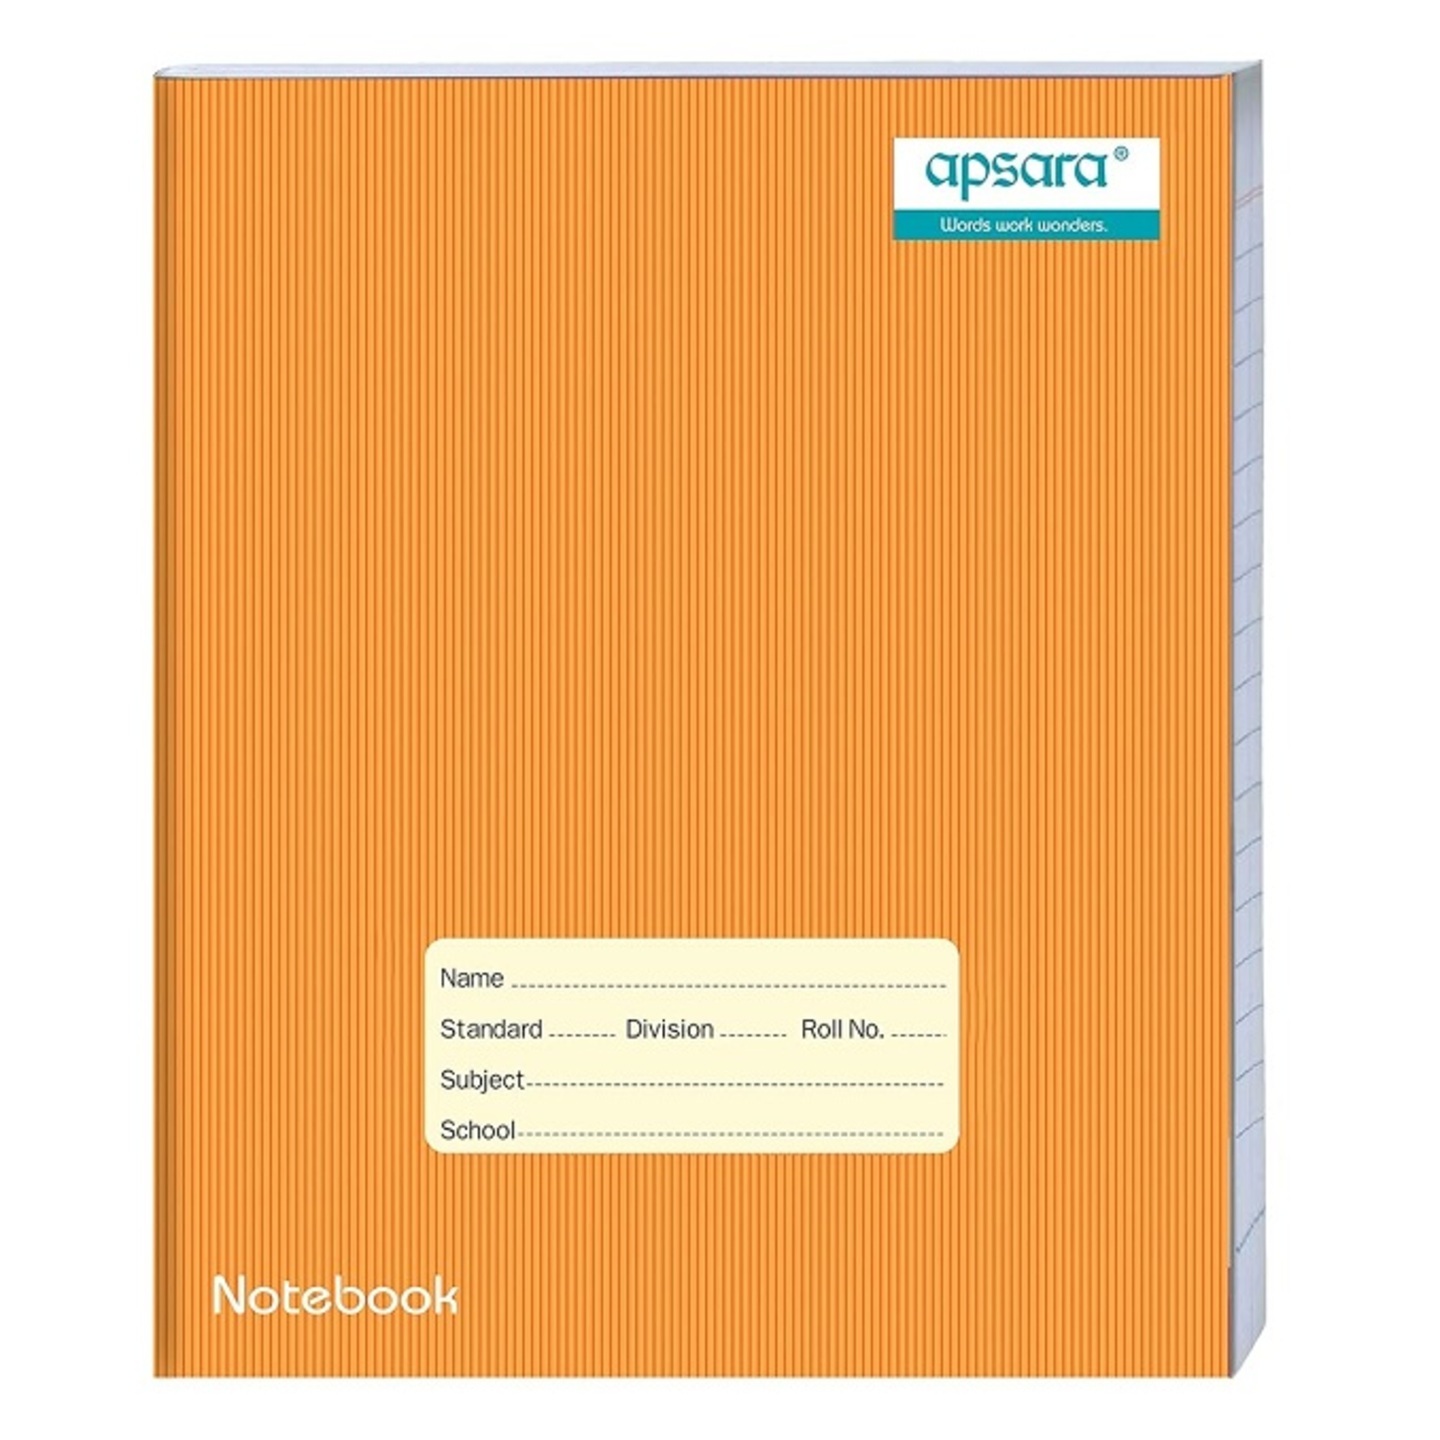 Apsara 92 Pages Square Rued Maths Exercise Notebook 19 x 15.5 cm